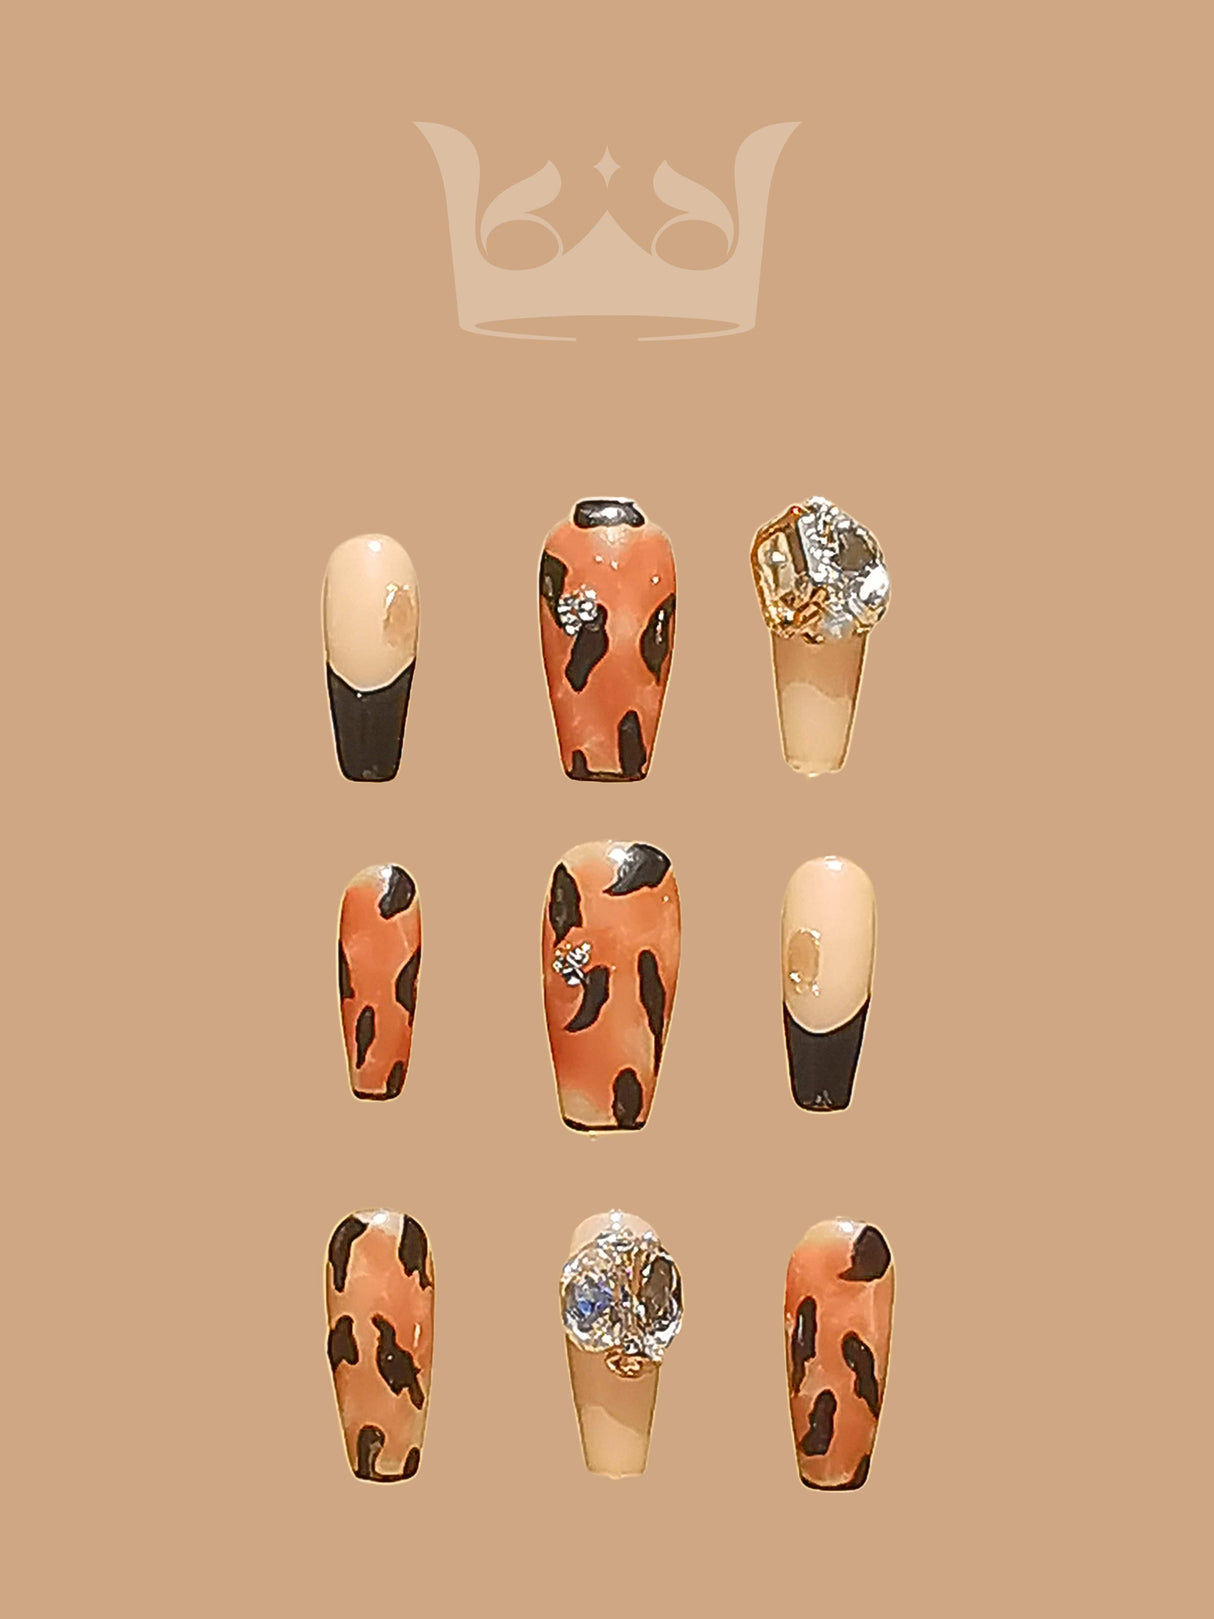 These versatile nails offer a fancy and elegant look with warm earthy tones, flower accents, two-tone design, glossy finish, and practical shape. Suitable for any occasion.